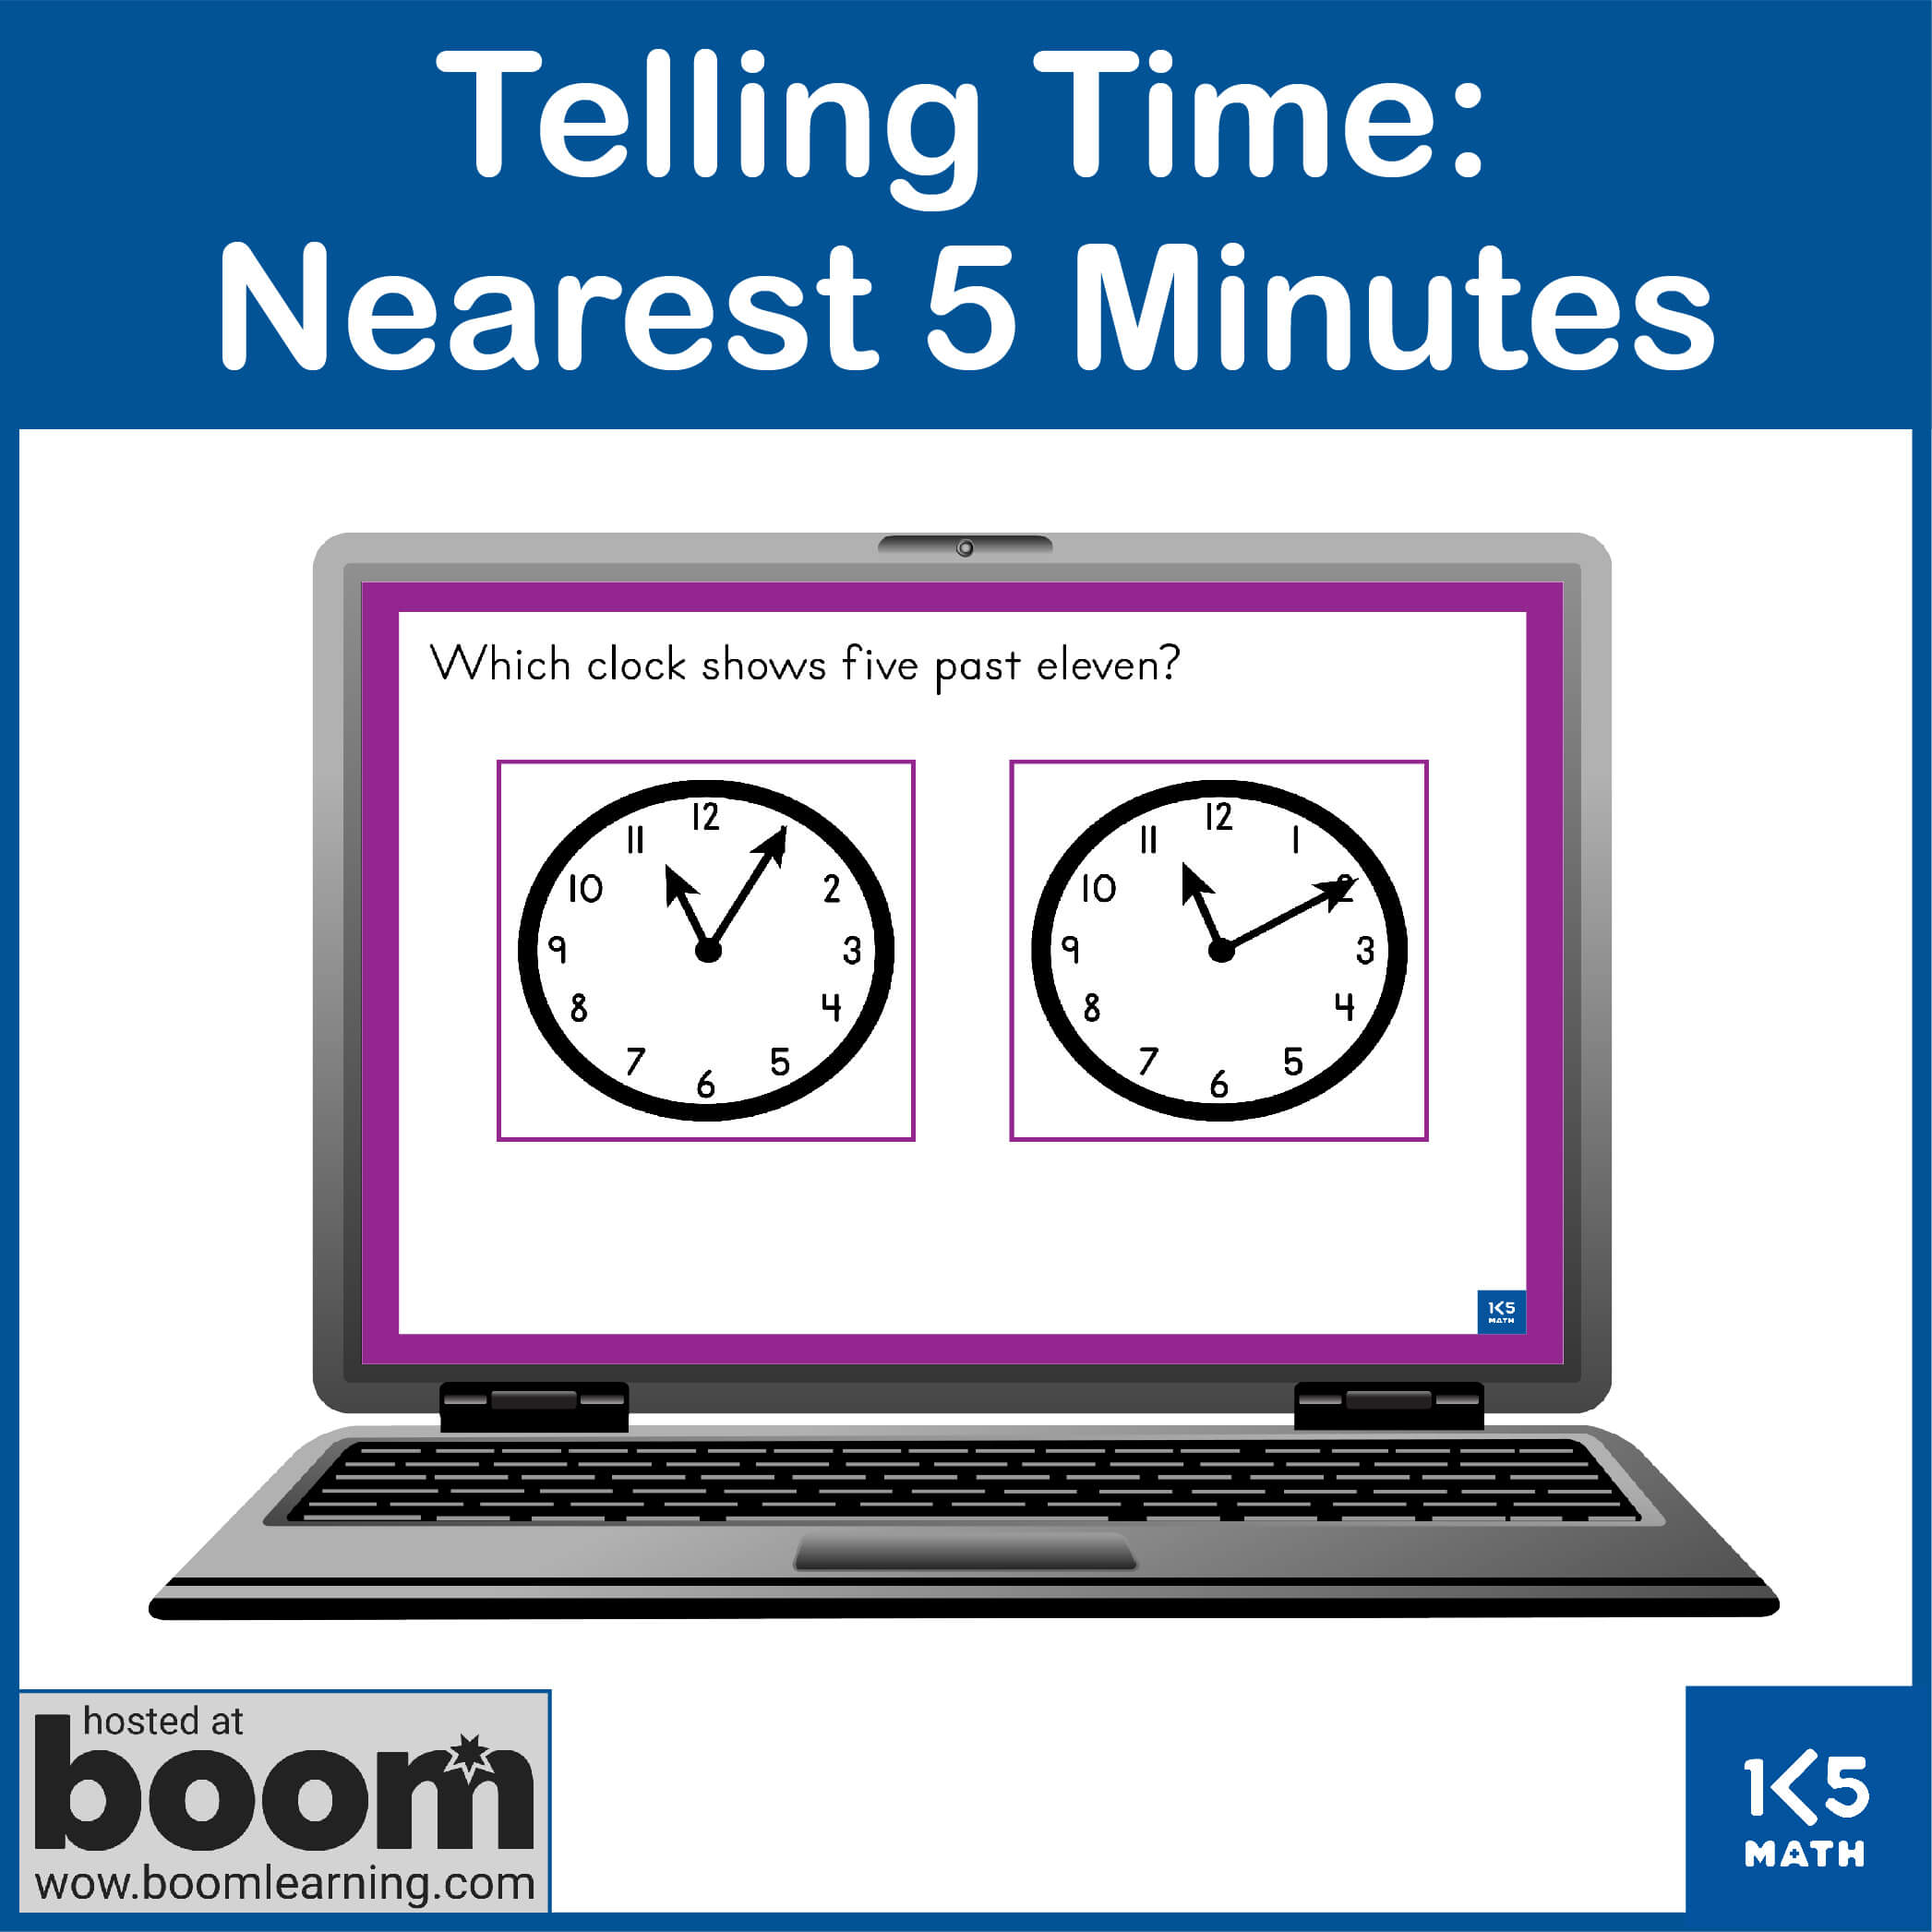 Boom Cards: Telling Time to the Nearest 5 Minutes